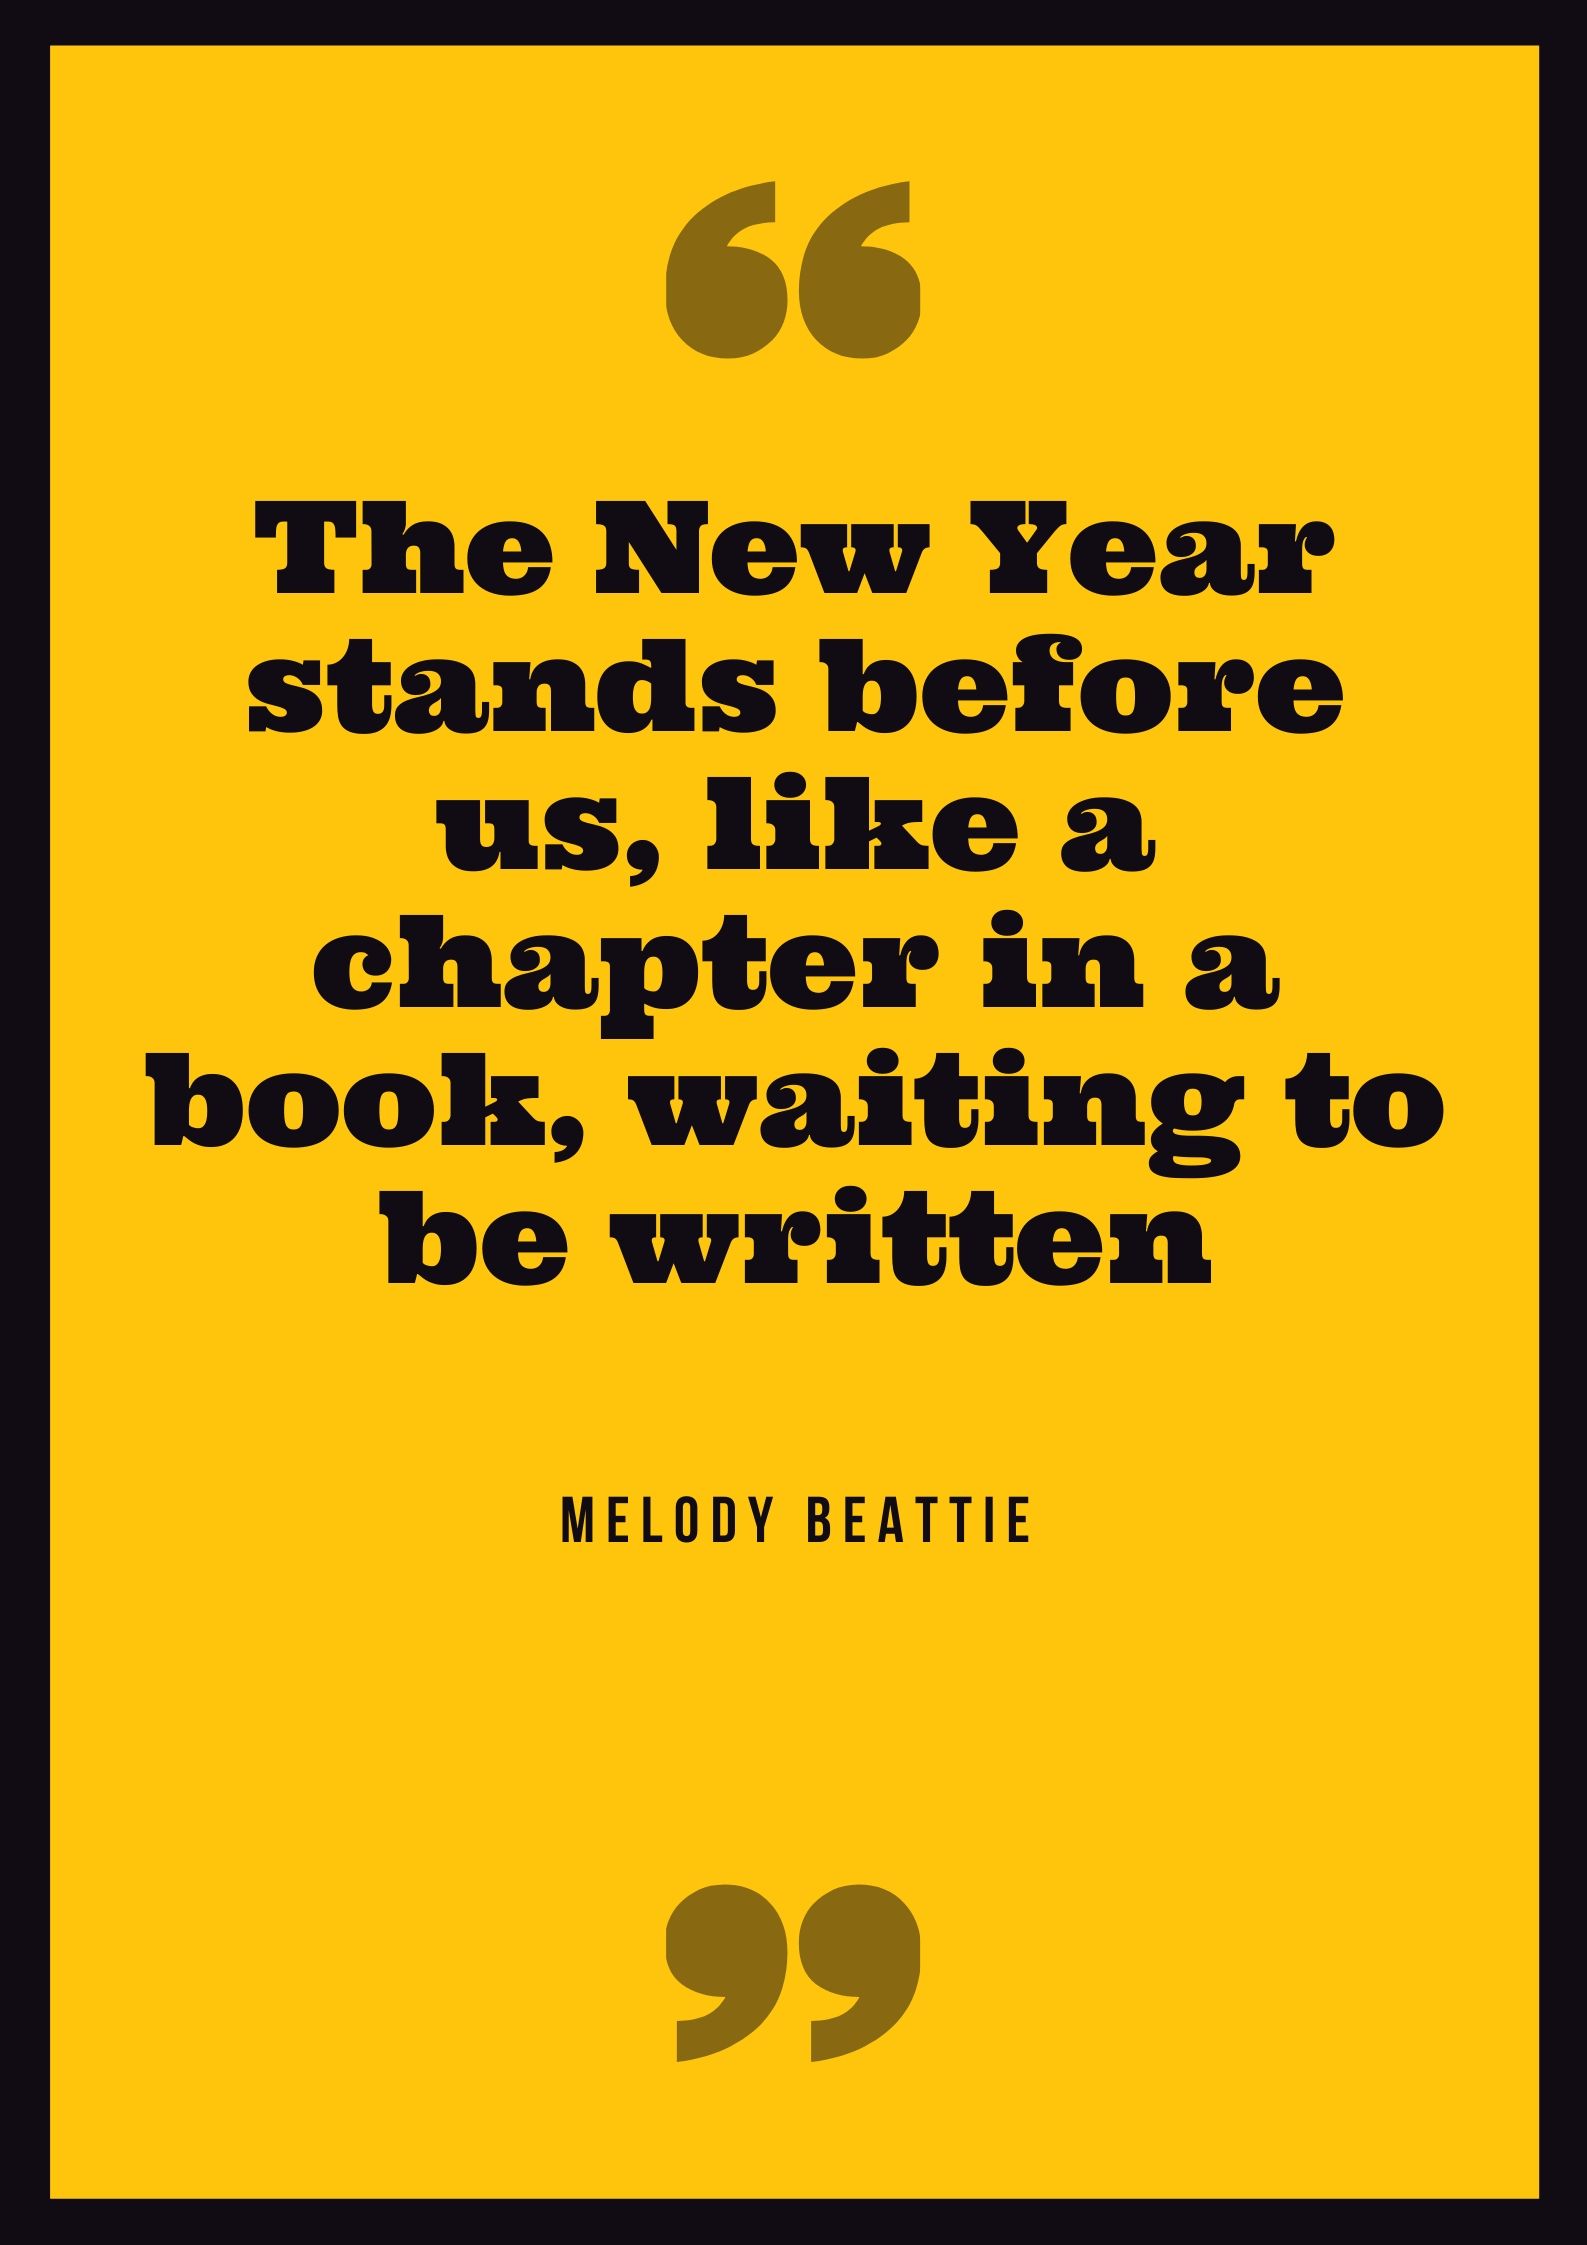 The New Year stands before us, like a chapter in a book, waiting to be written